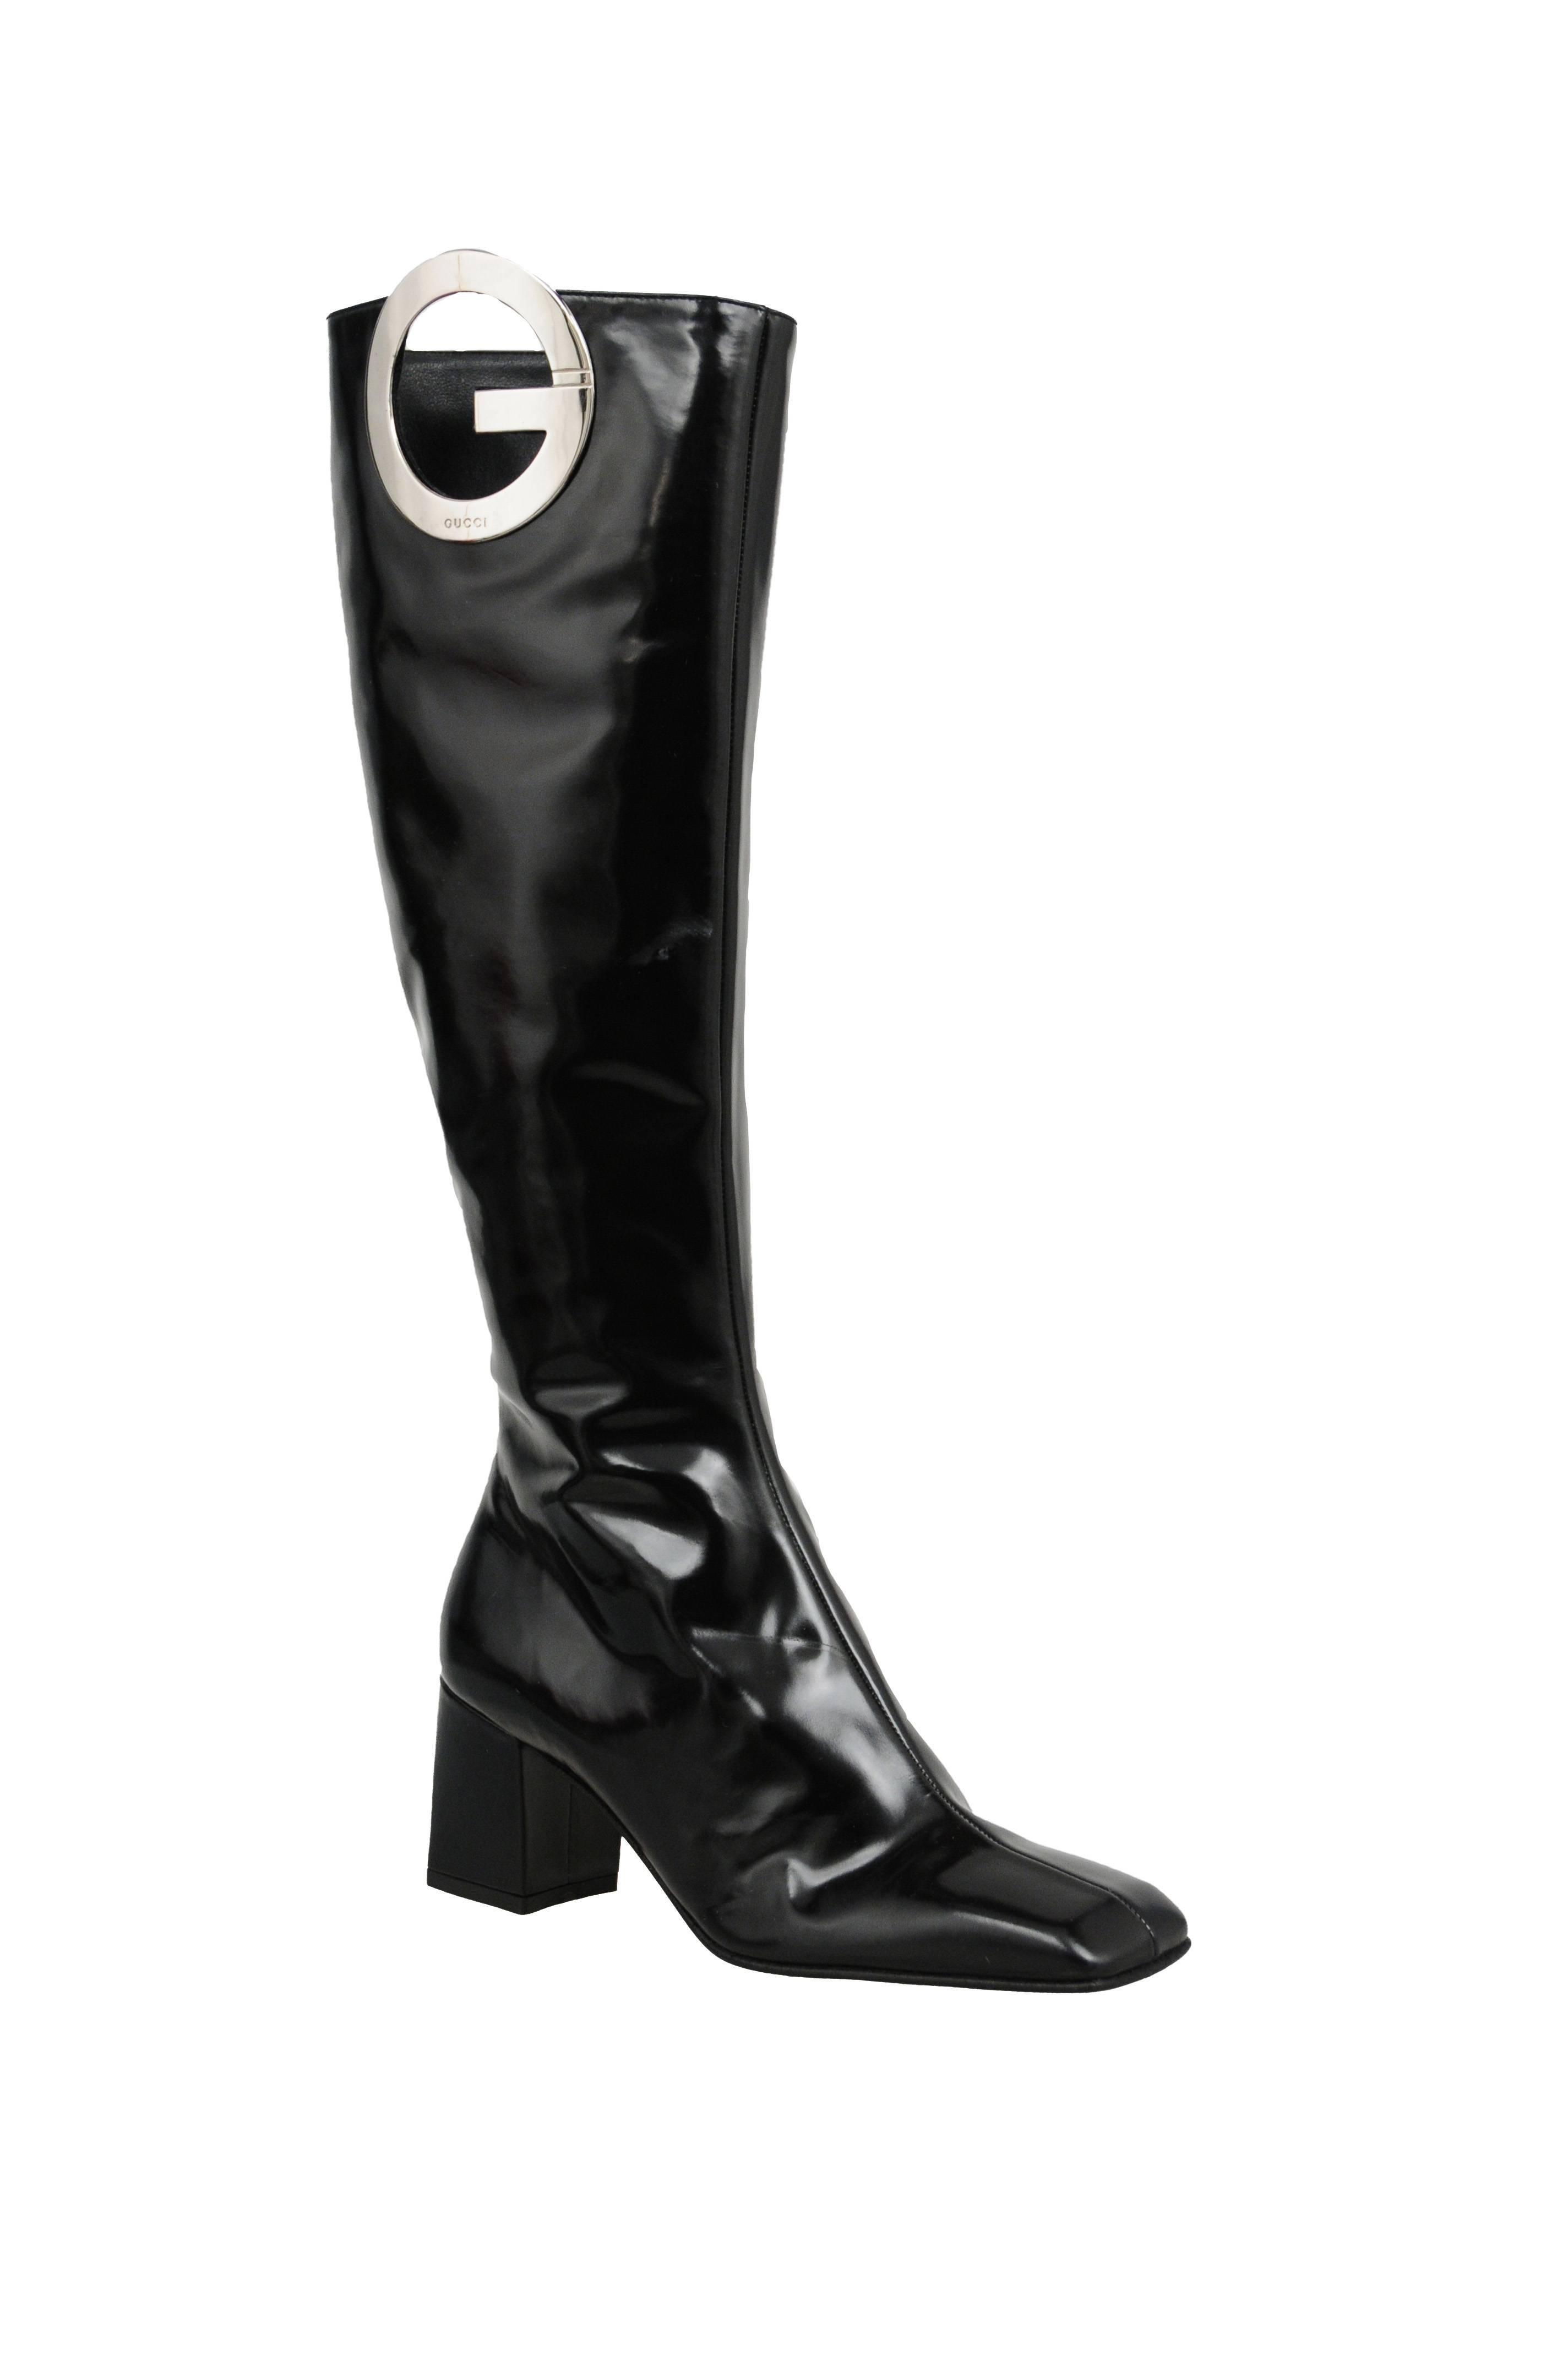 Vintage Tom Ford for Gucci black leather tall boot with silver 'G' logo detail. Zip closure at side.
Please inquire for additional images.